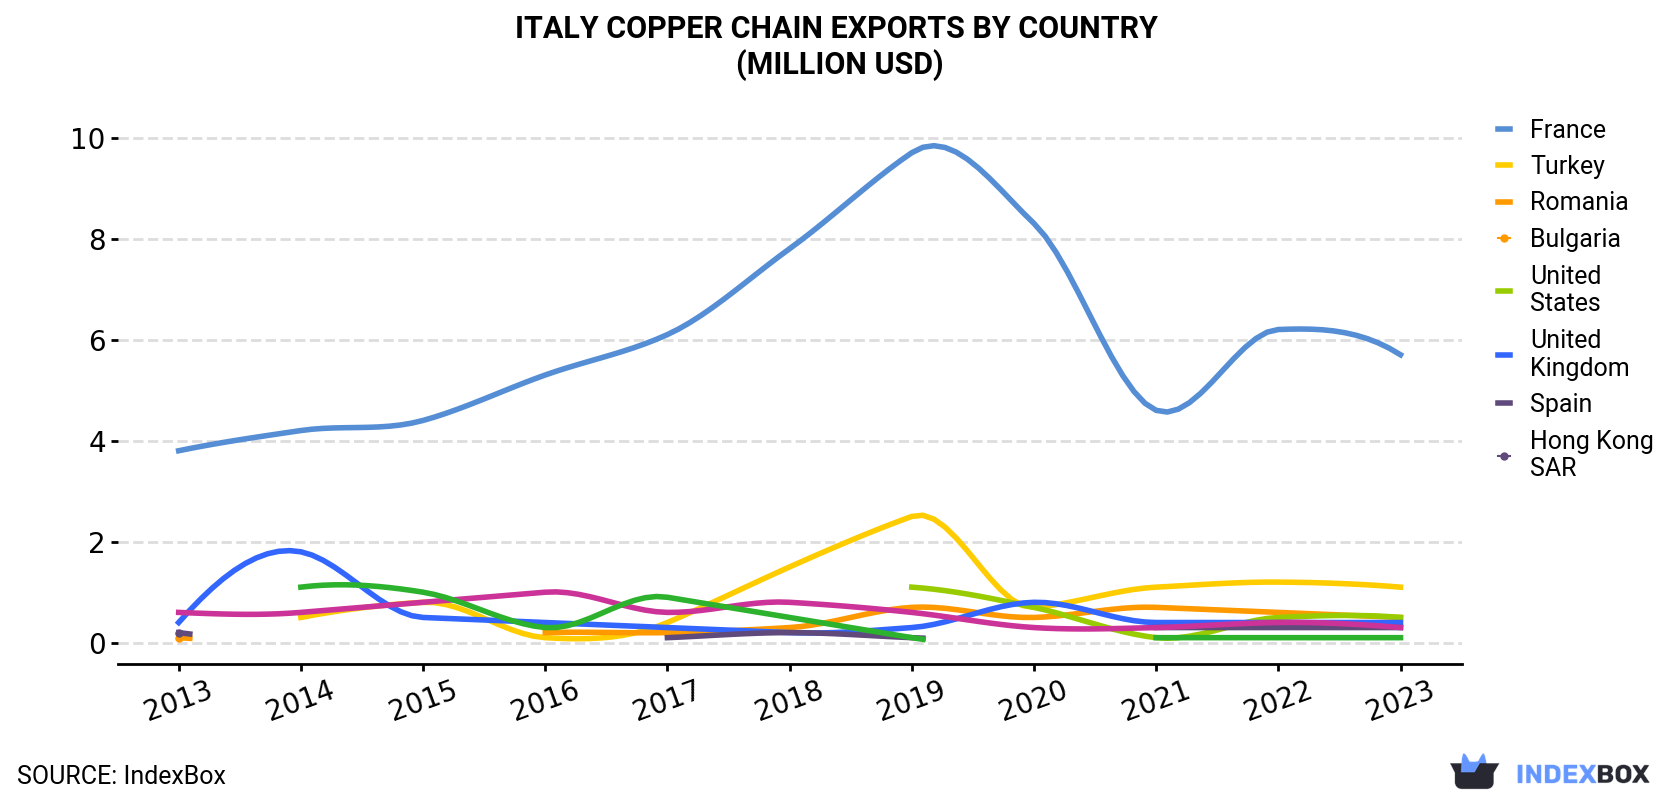 Italy Copper Chain Exports By Country (Million USD)